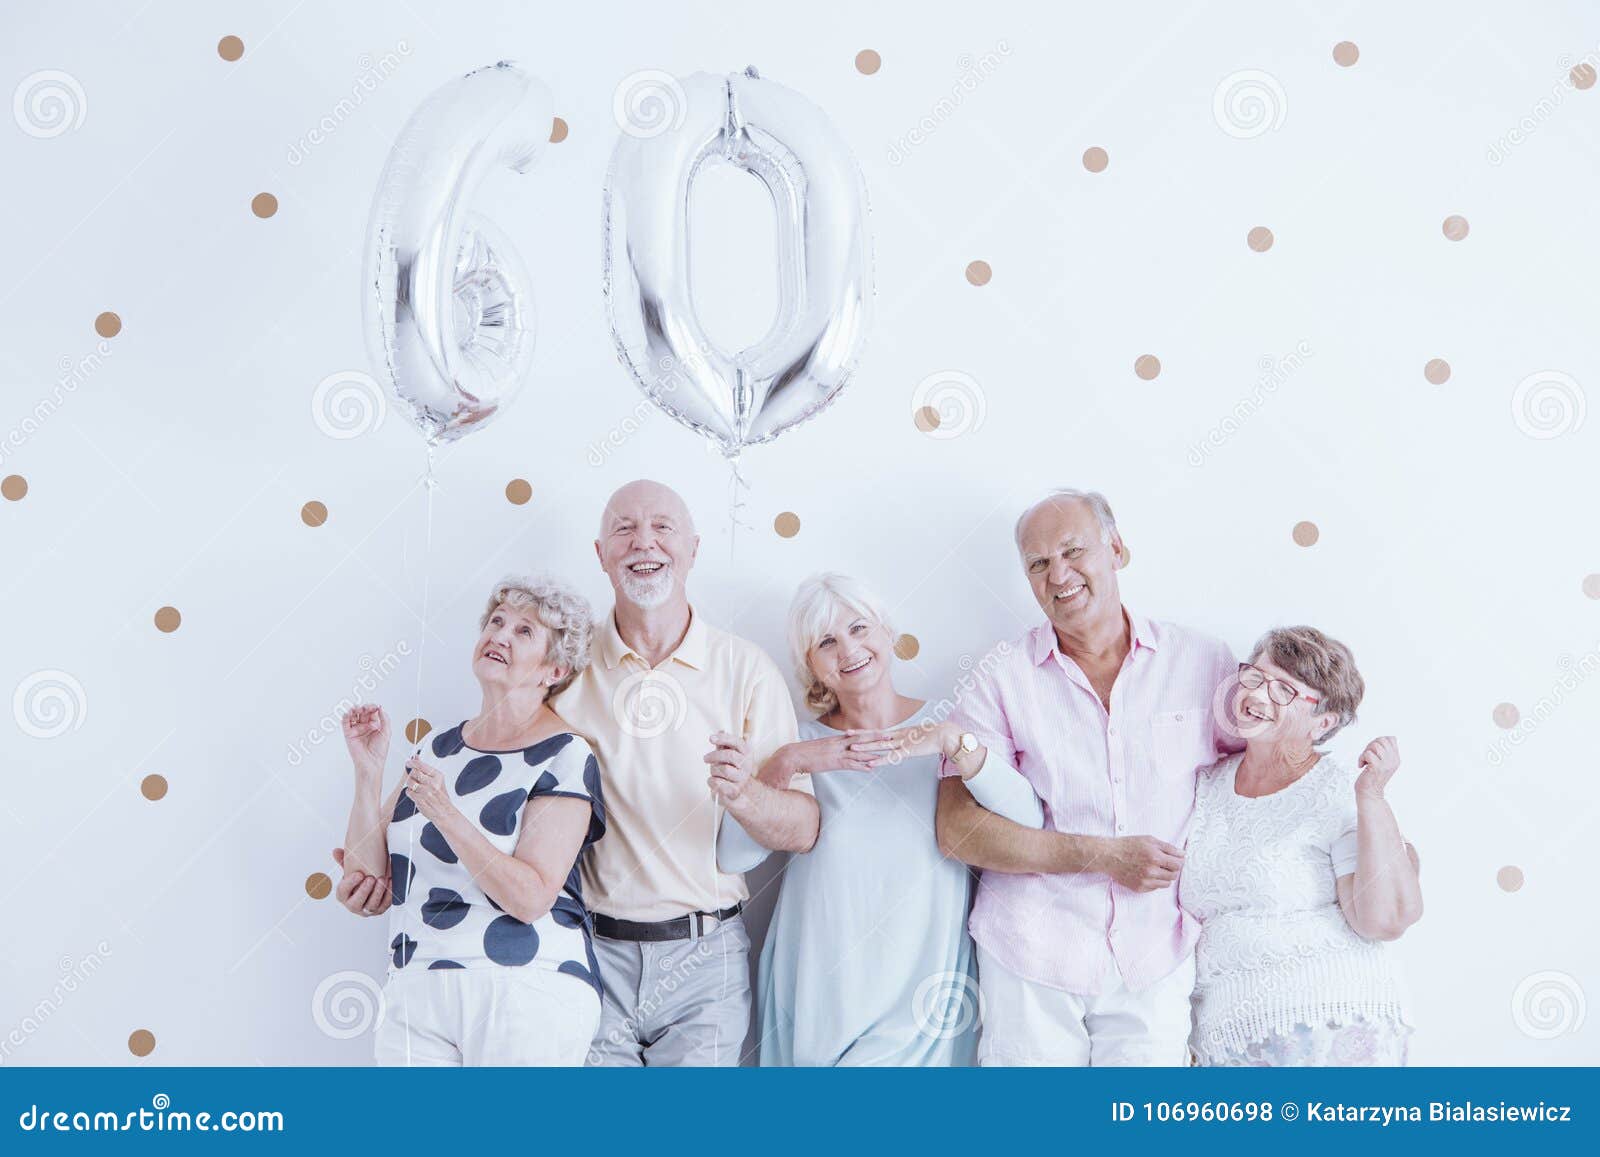 enthusiastic seniors with silver balloons